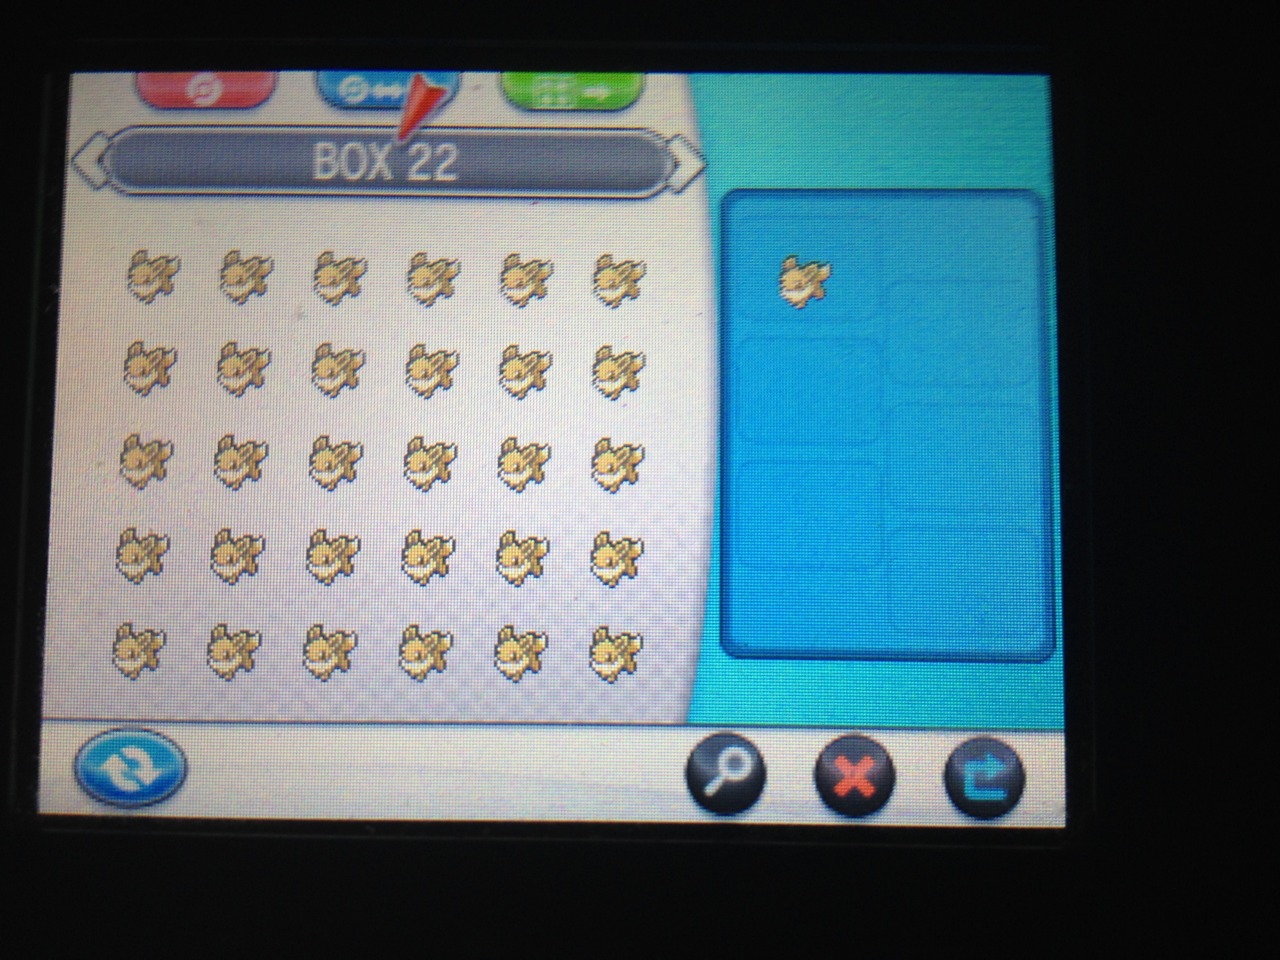 holothewolf-x:  SHINY EEVEE BOUNS MASSIVE GIVE AWAY EXTREME!!! XD lol but seriously